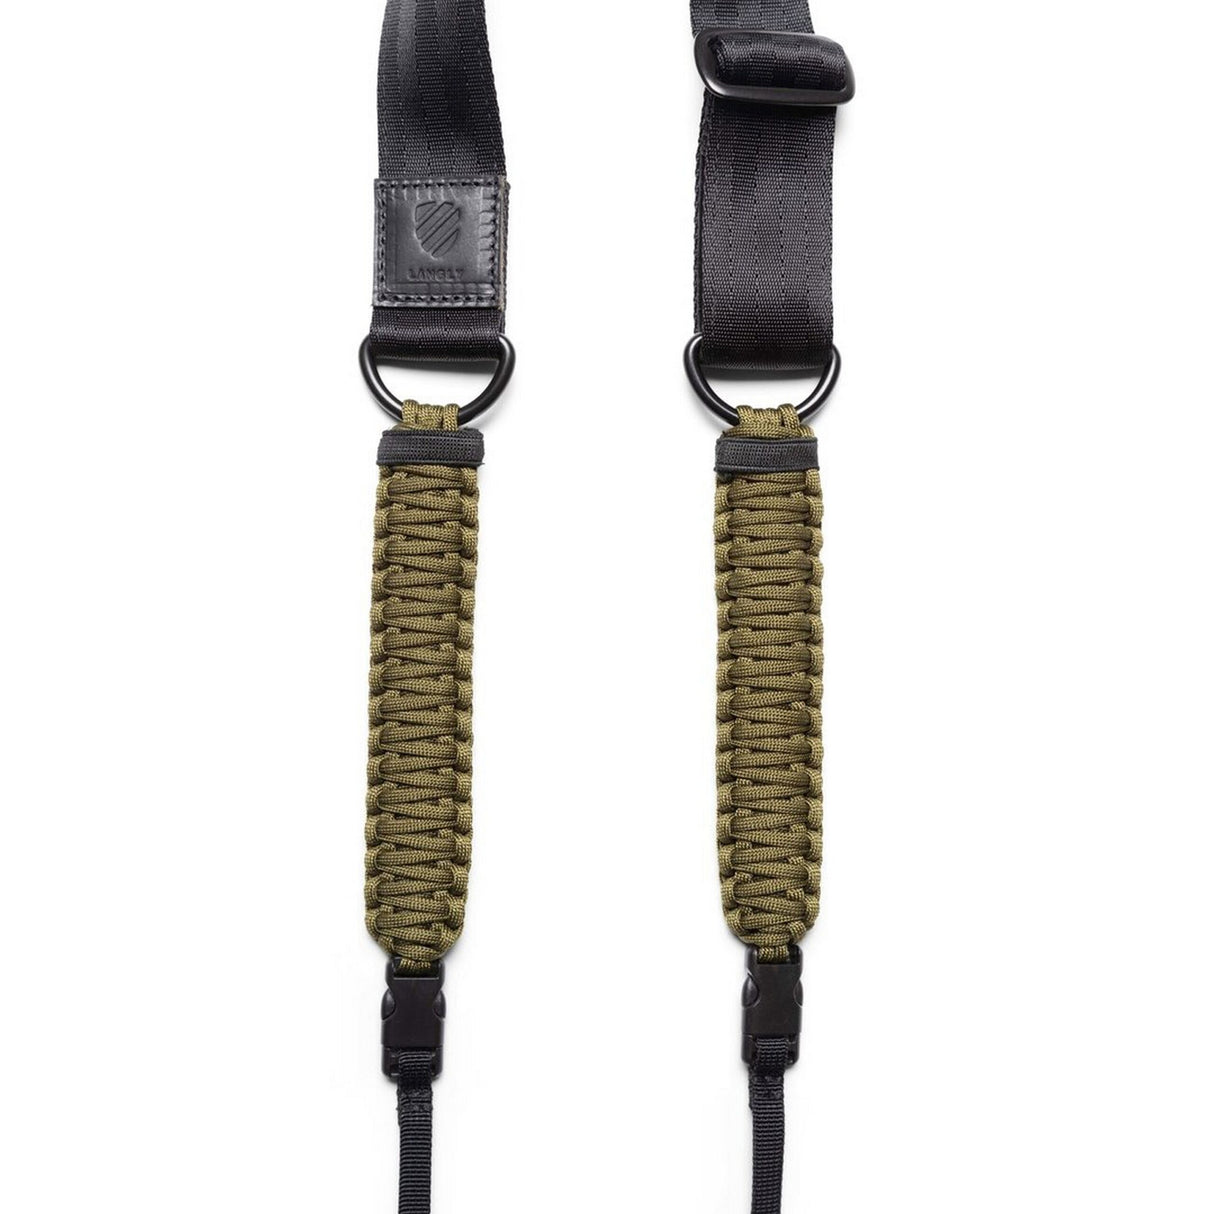 Langly Paracord Camera Strap, Olive